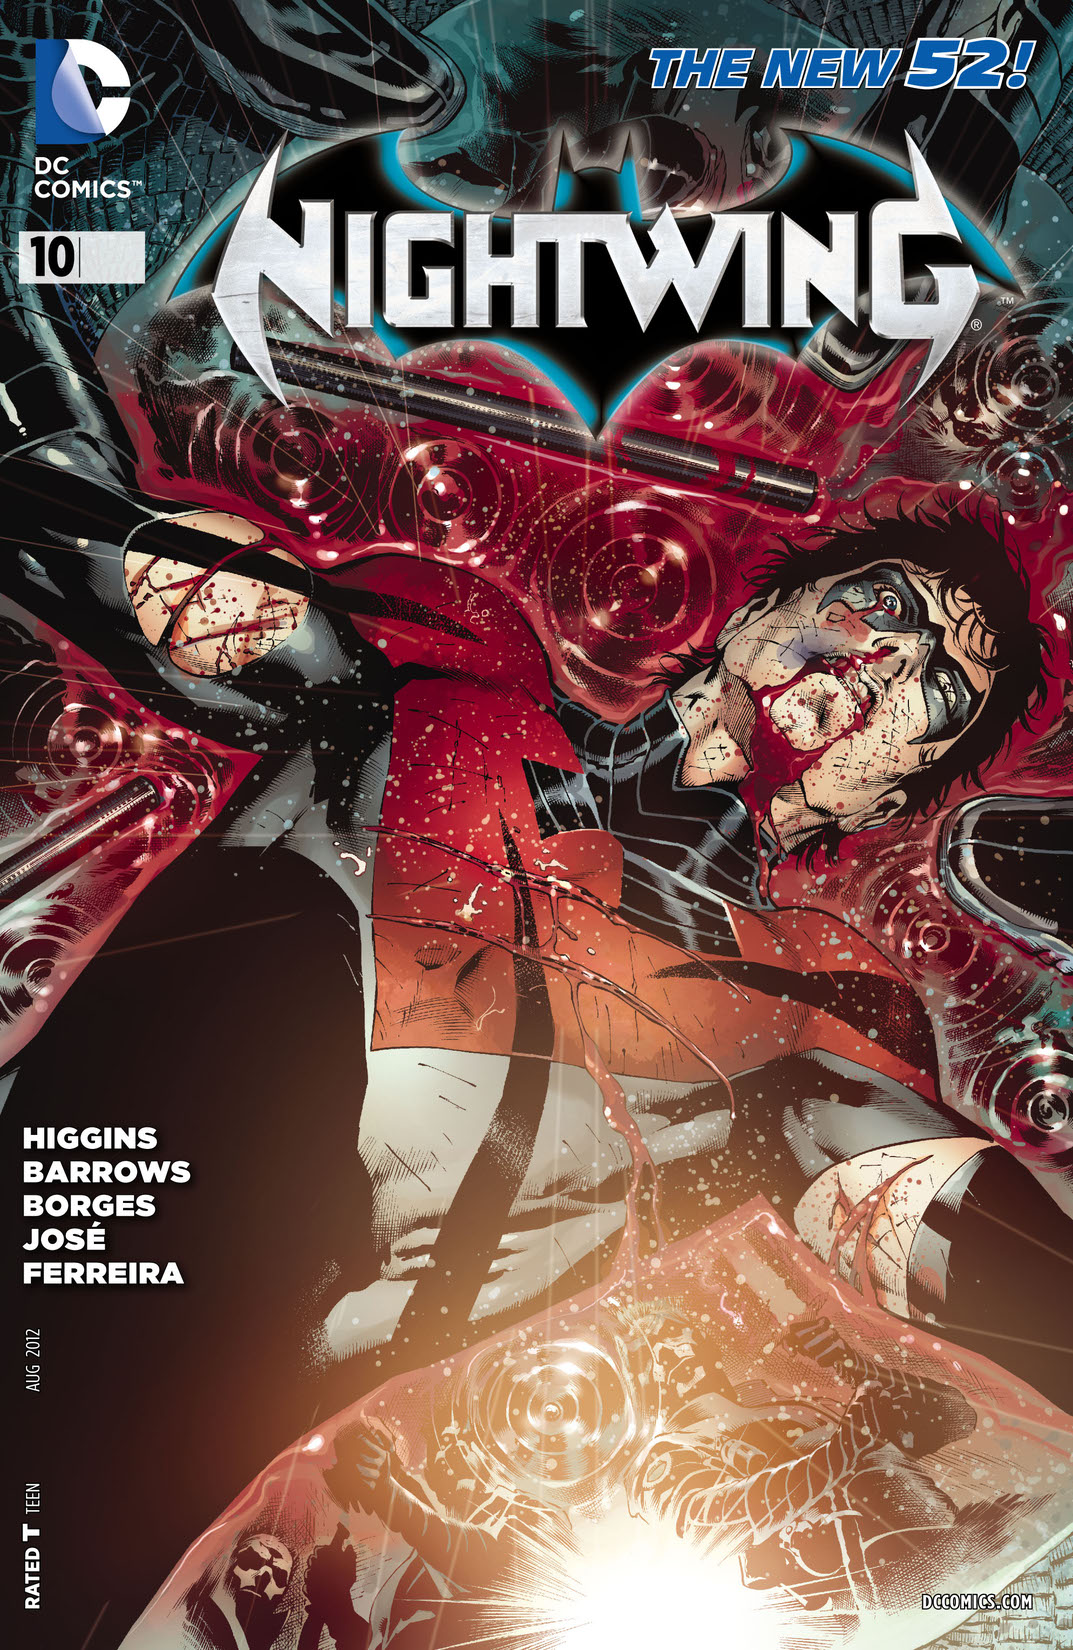 Nightwing (2011-) #10 preview images